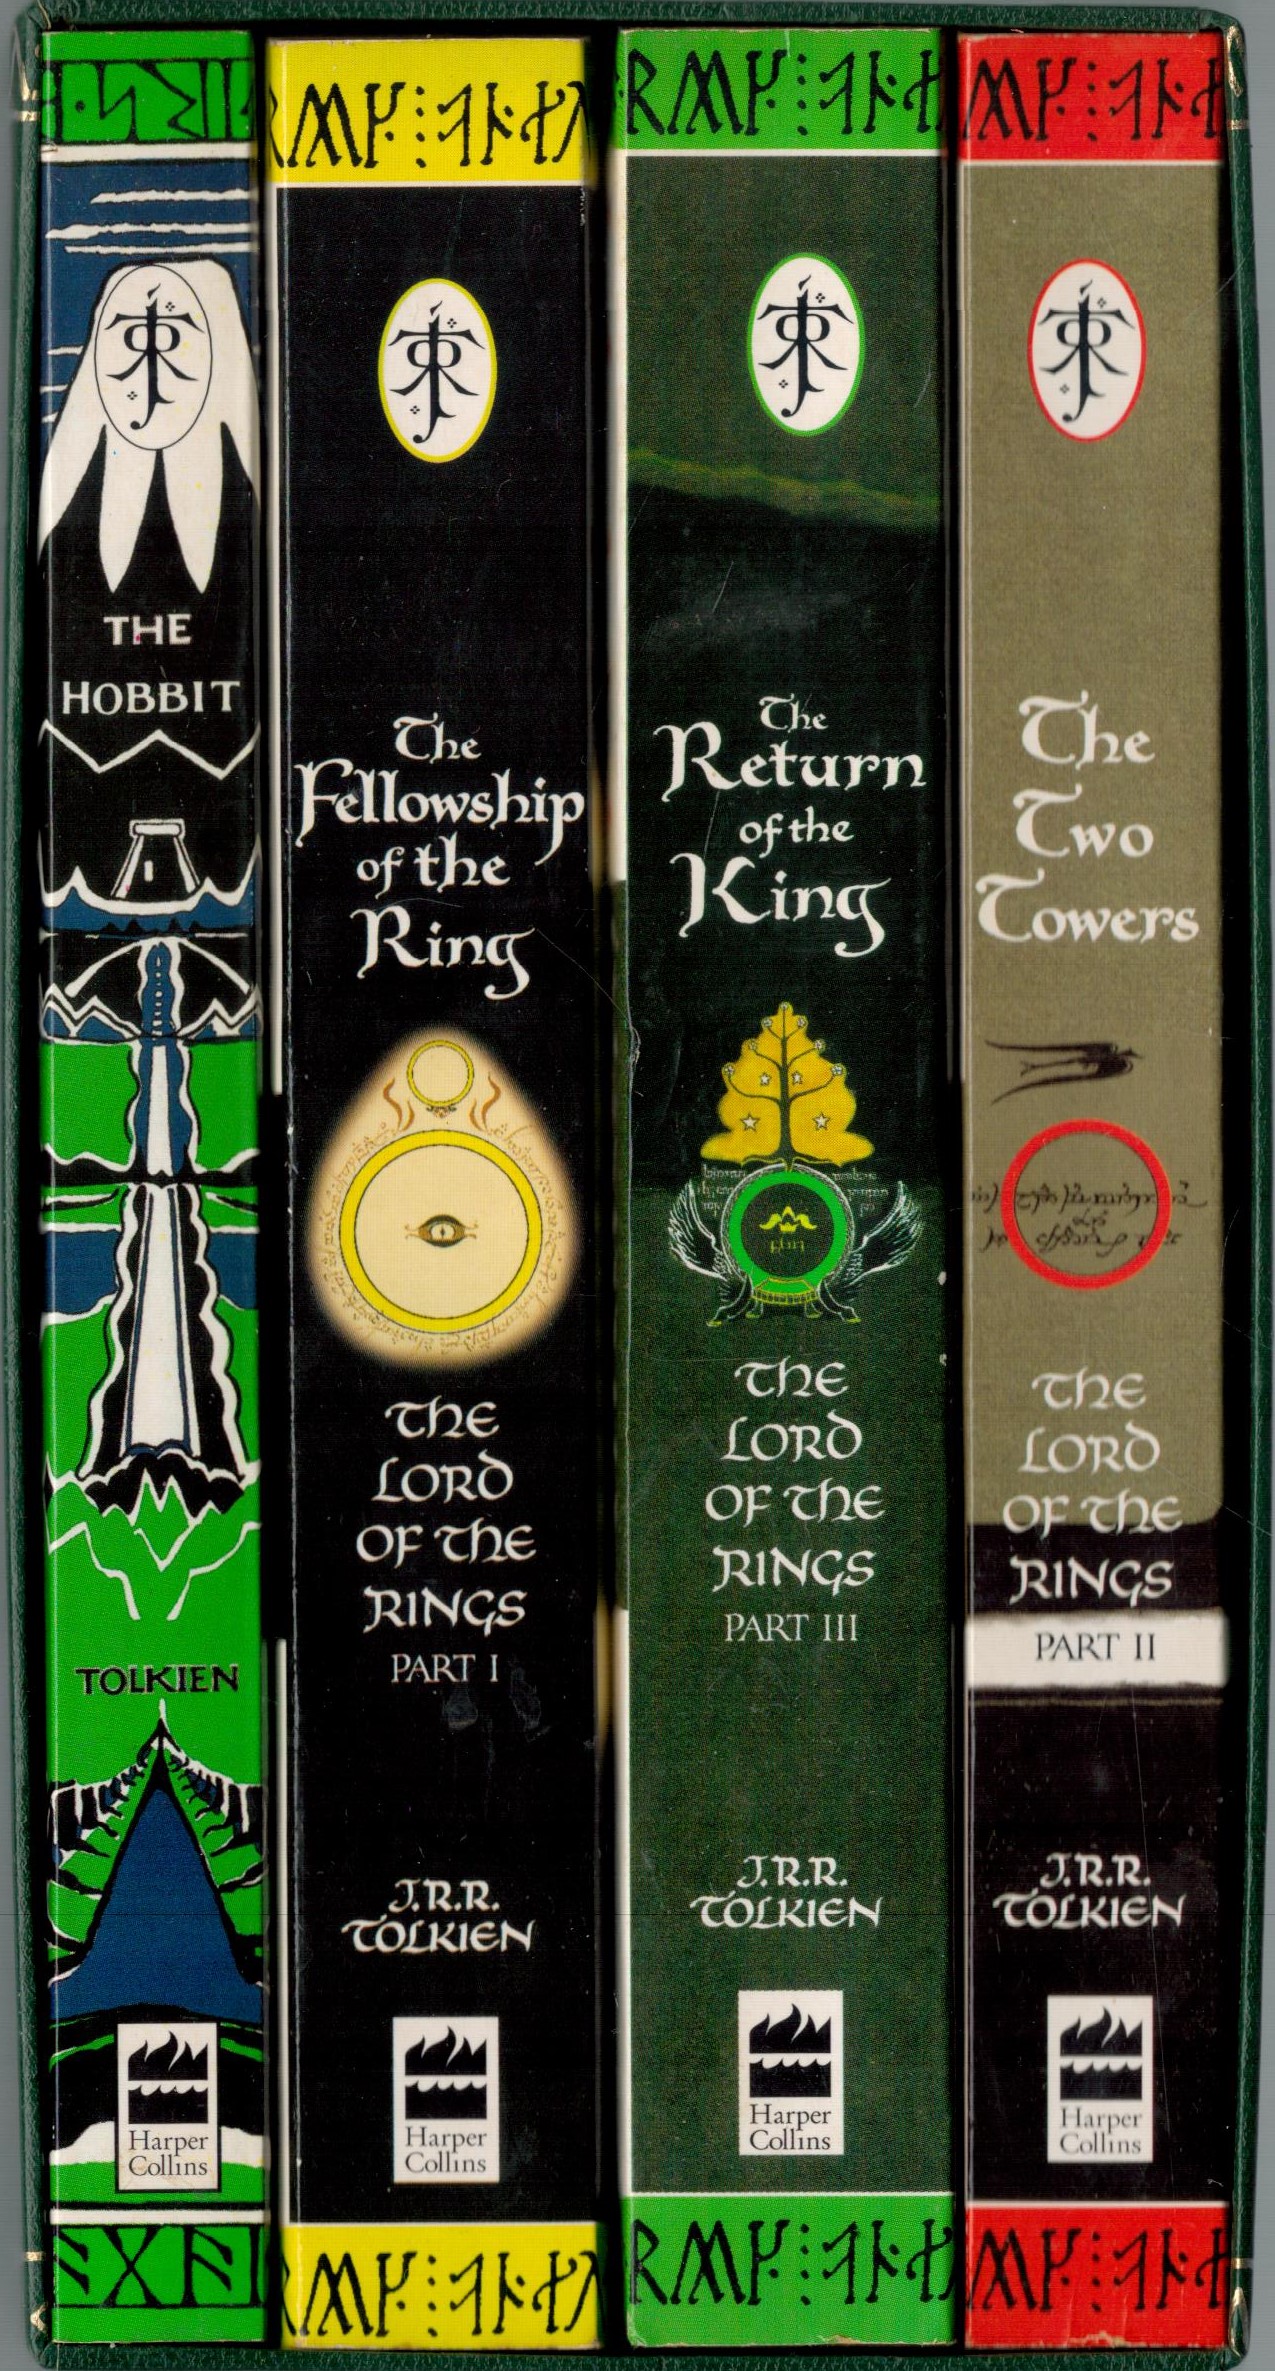 4 x Books The Hobbit and The Lord Of The Rings part 1, 2, 3, by J R R Tolkien 1996 New Edition